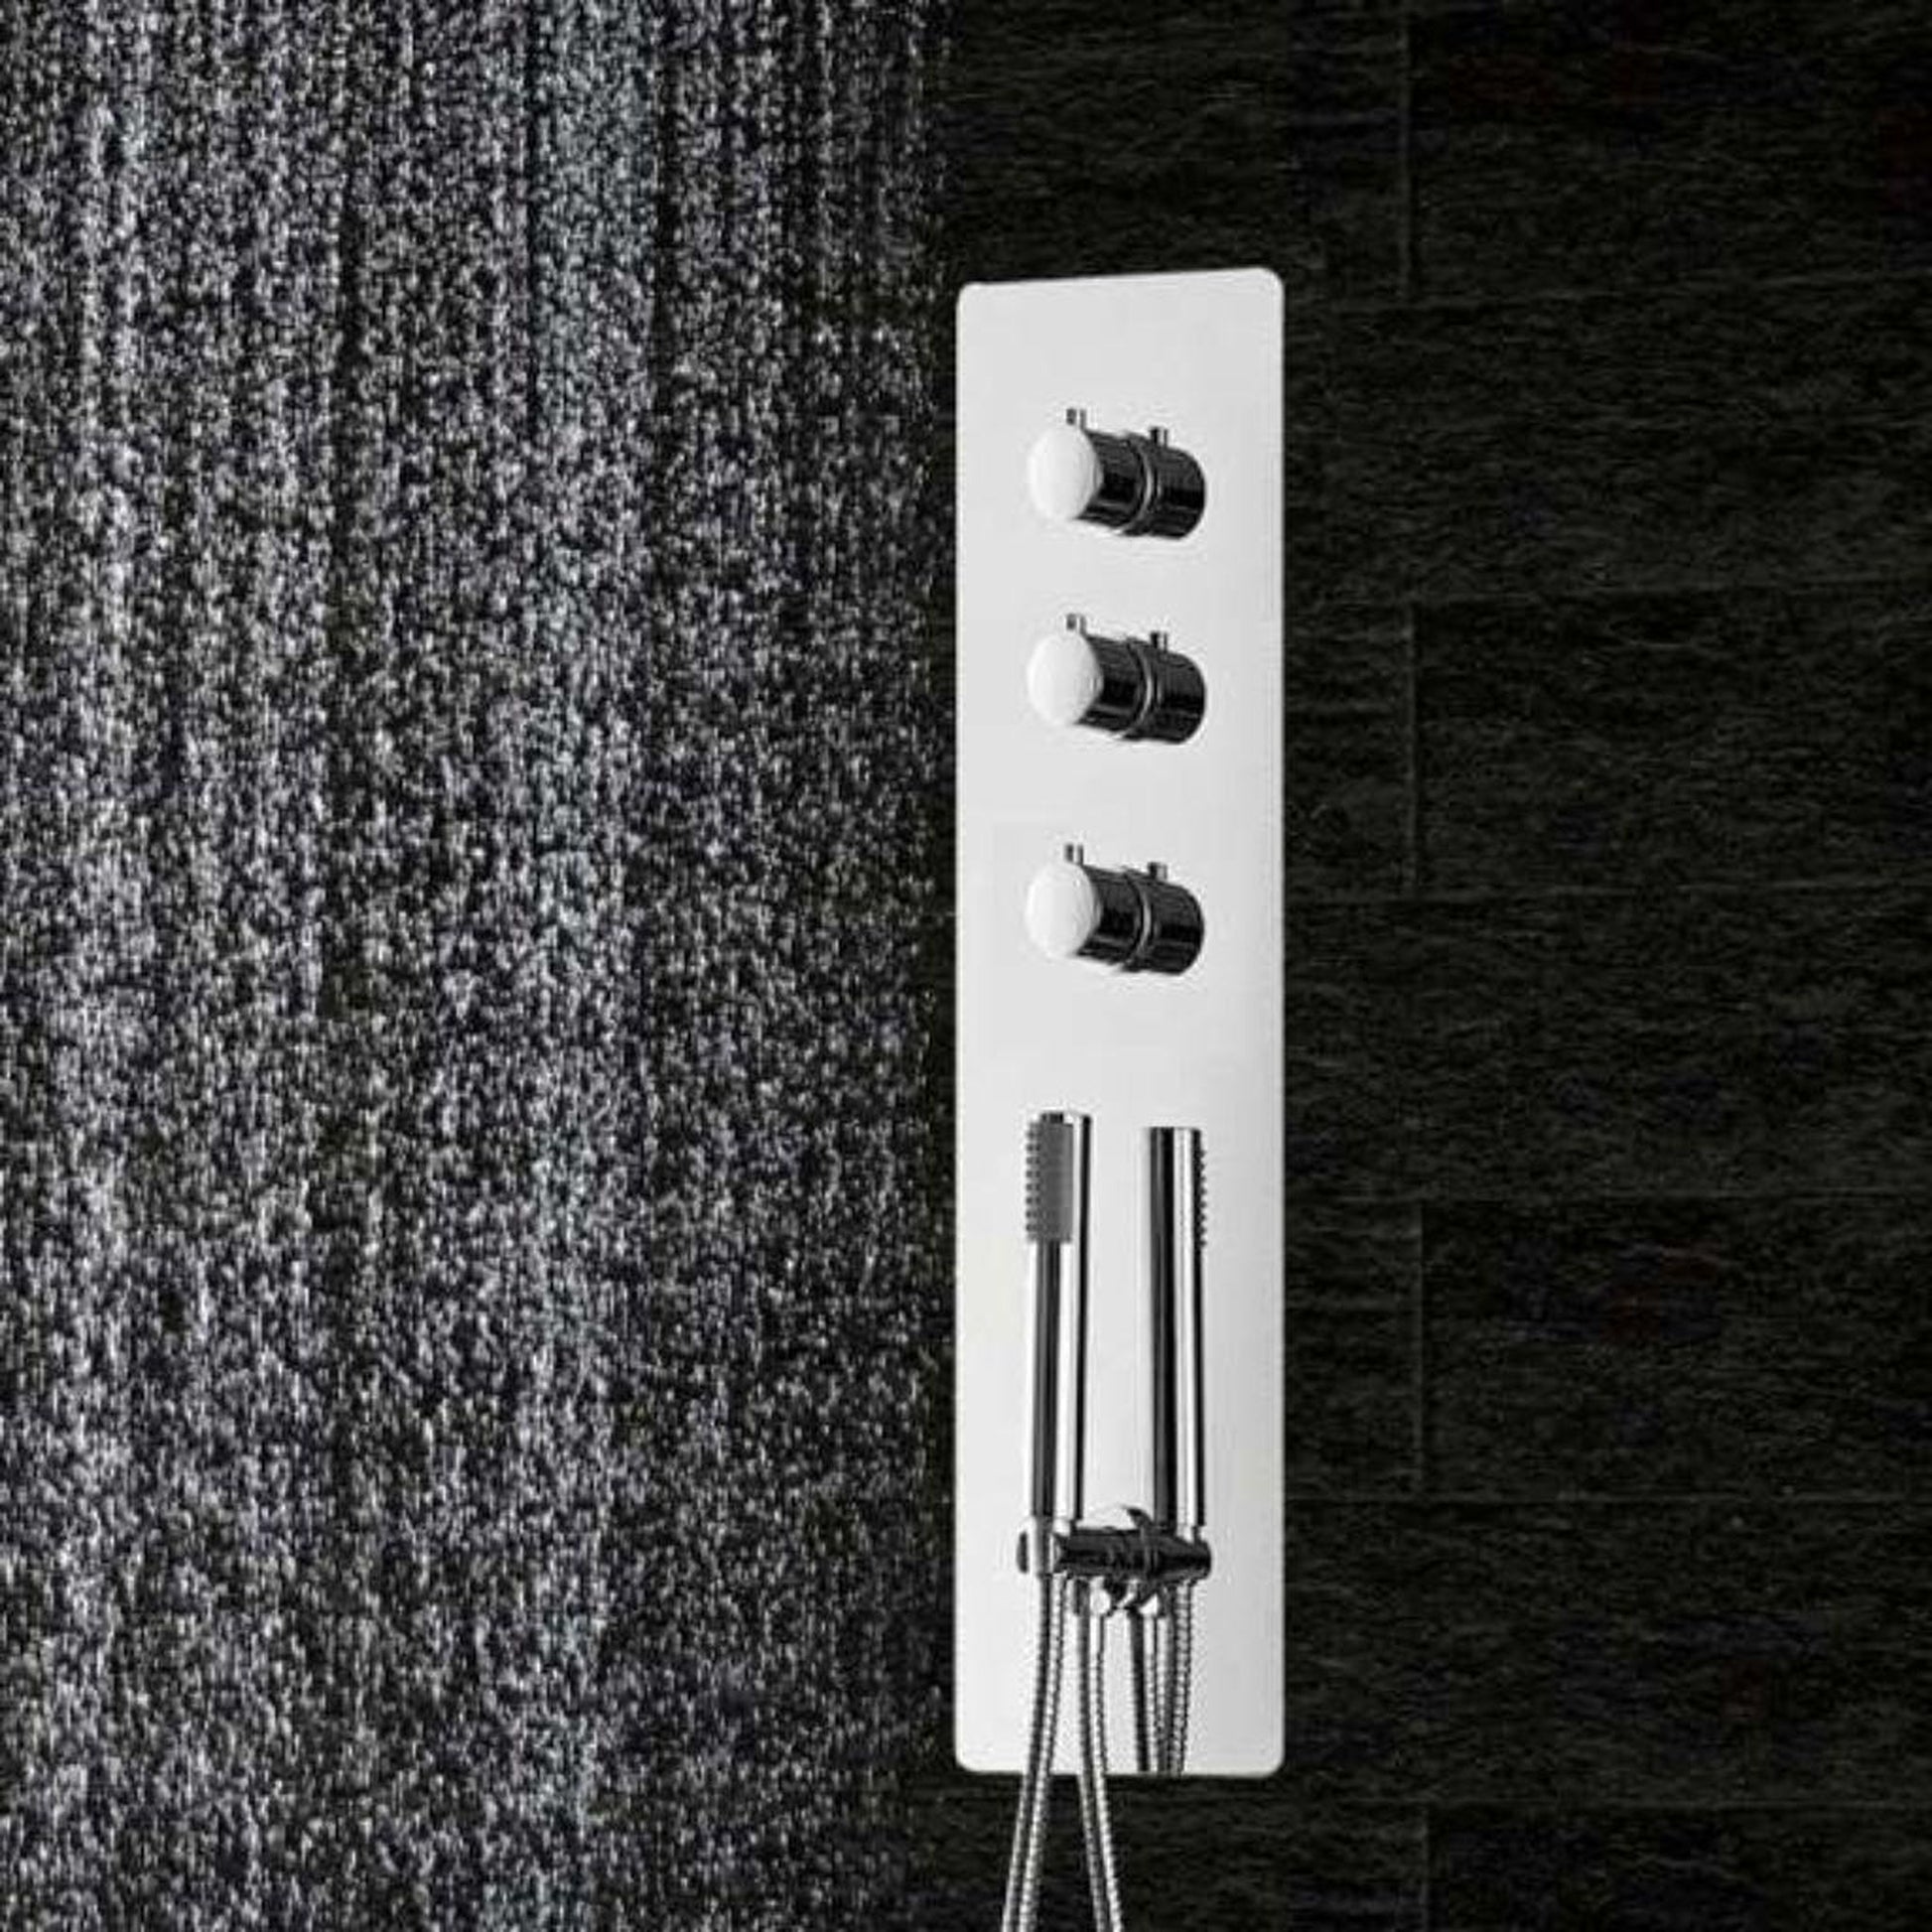 FontanaShowers Agra Creative Luxury Chrome Thermostatic Multi-Function Recessed Complete Shower Head System